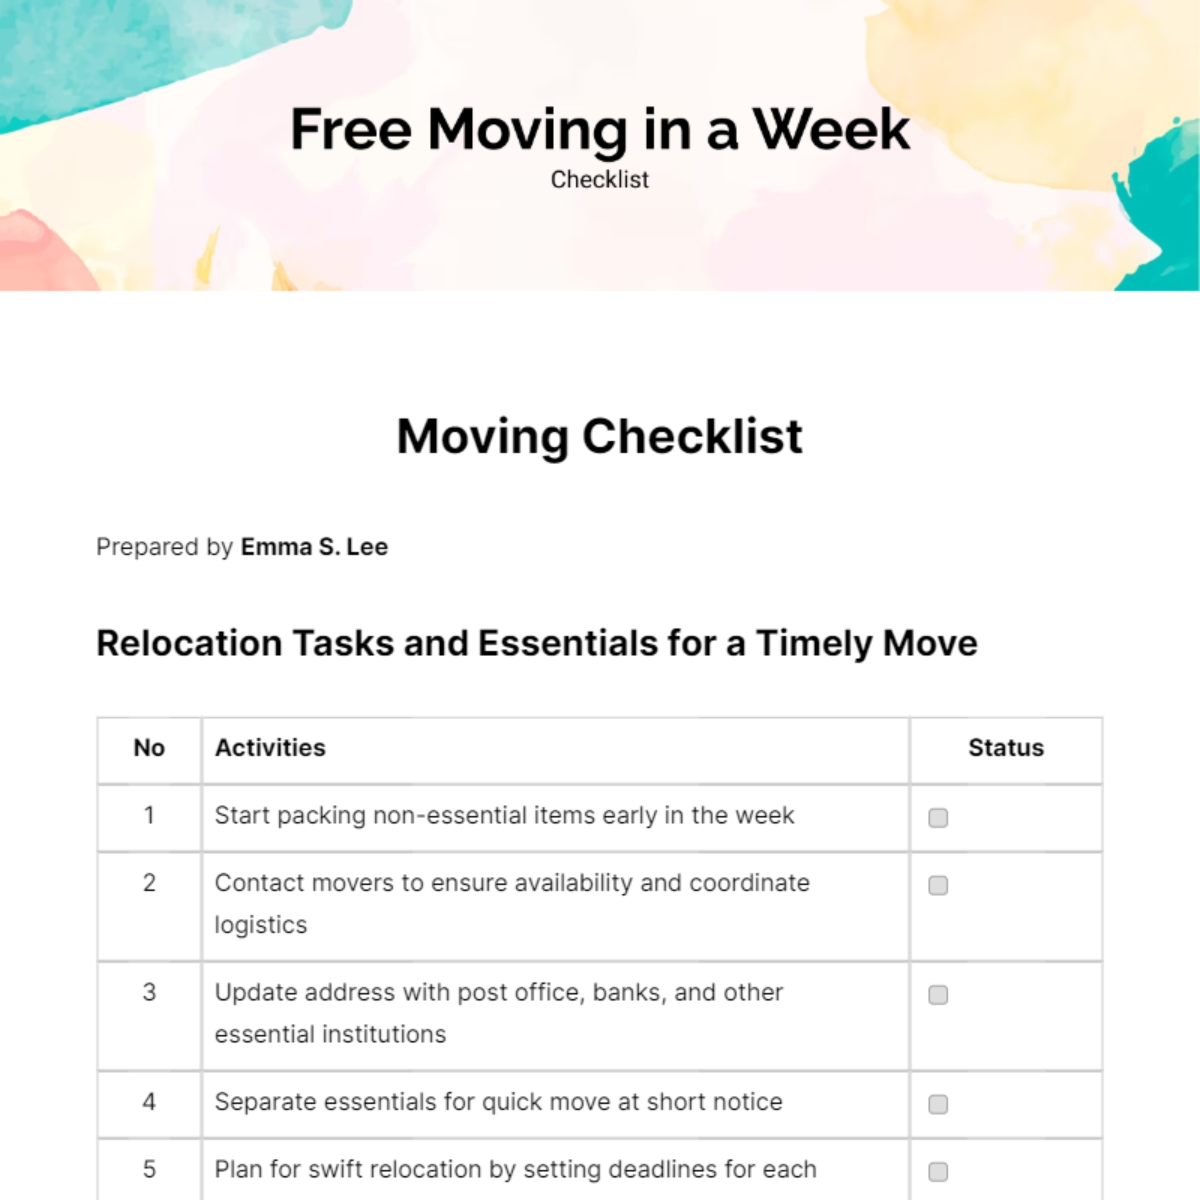 Free Moving in a Week Checklist Template